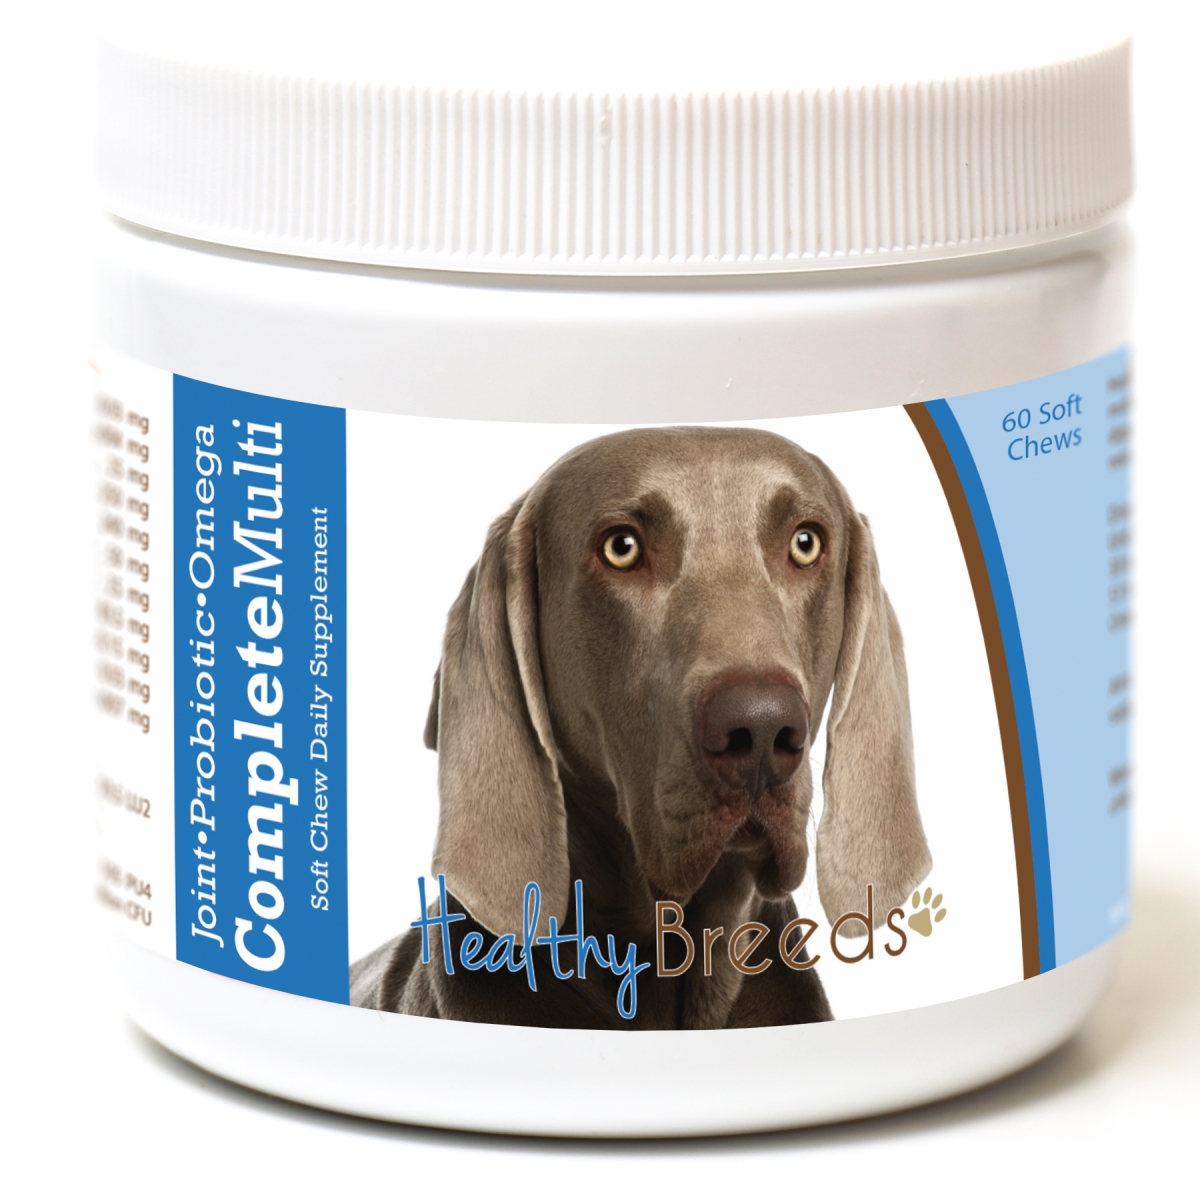 Picture of Healthy Breeds 192959009248 Weimaraner all in one Multivitamin Soft Chew - 60 Count